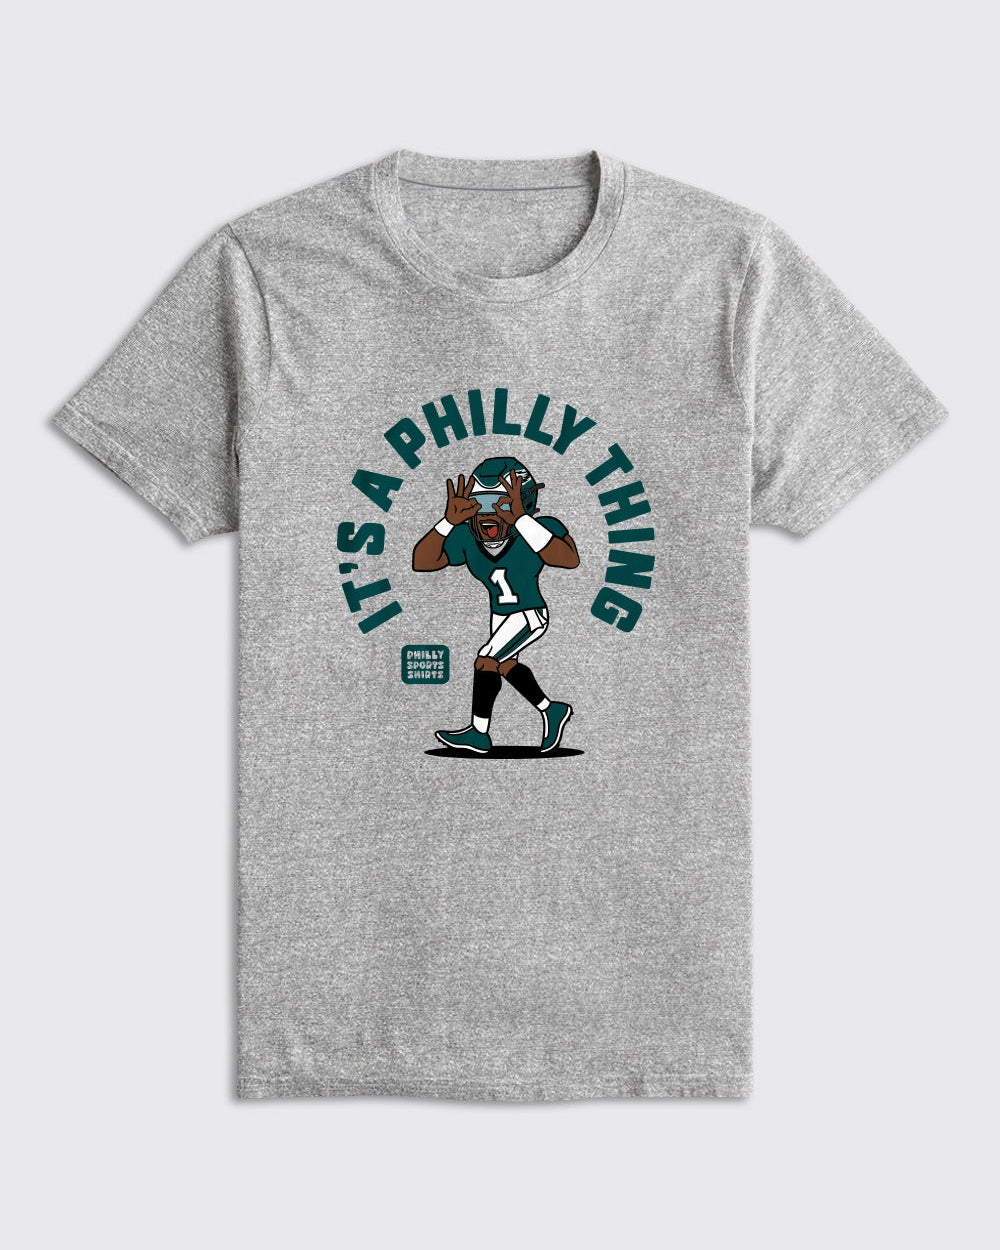 It's A Philly Thing Shirt - Eagles, T-Shirts - Philly Sports Shirts